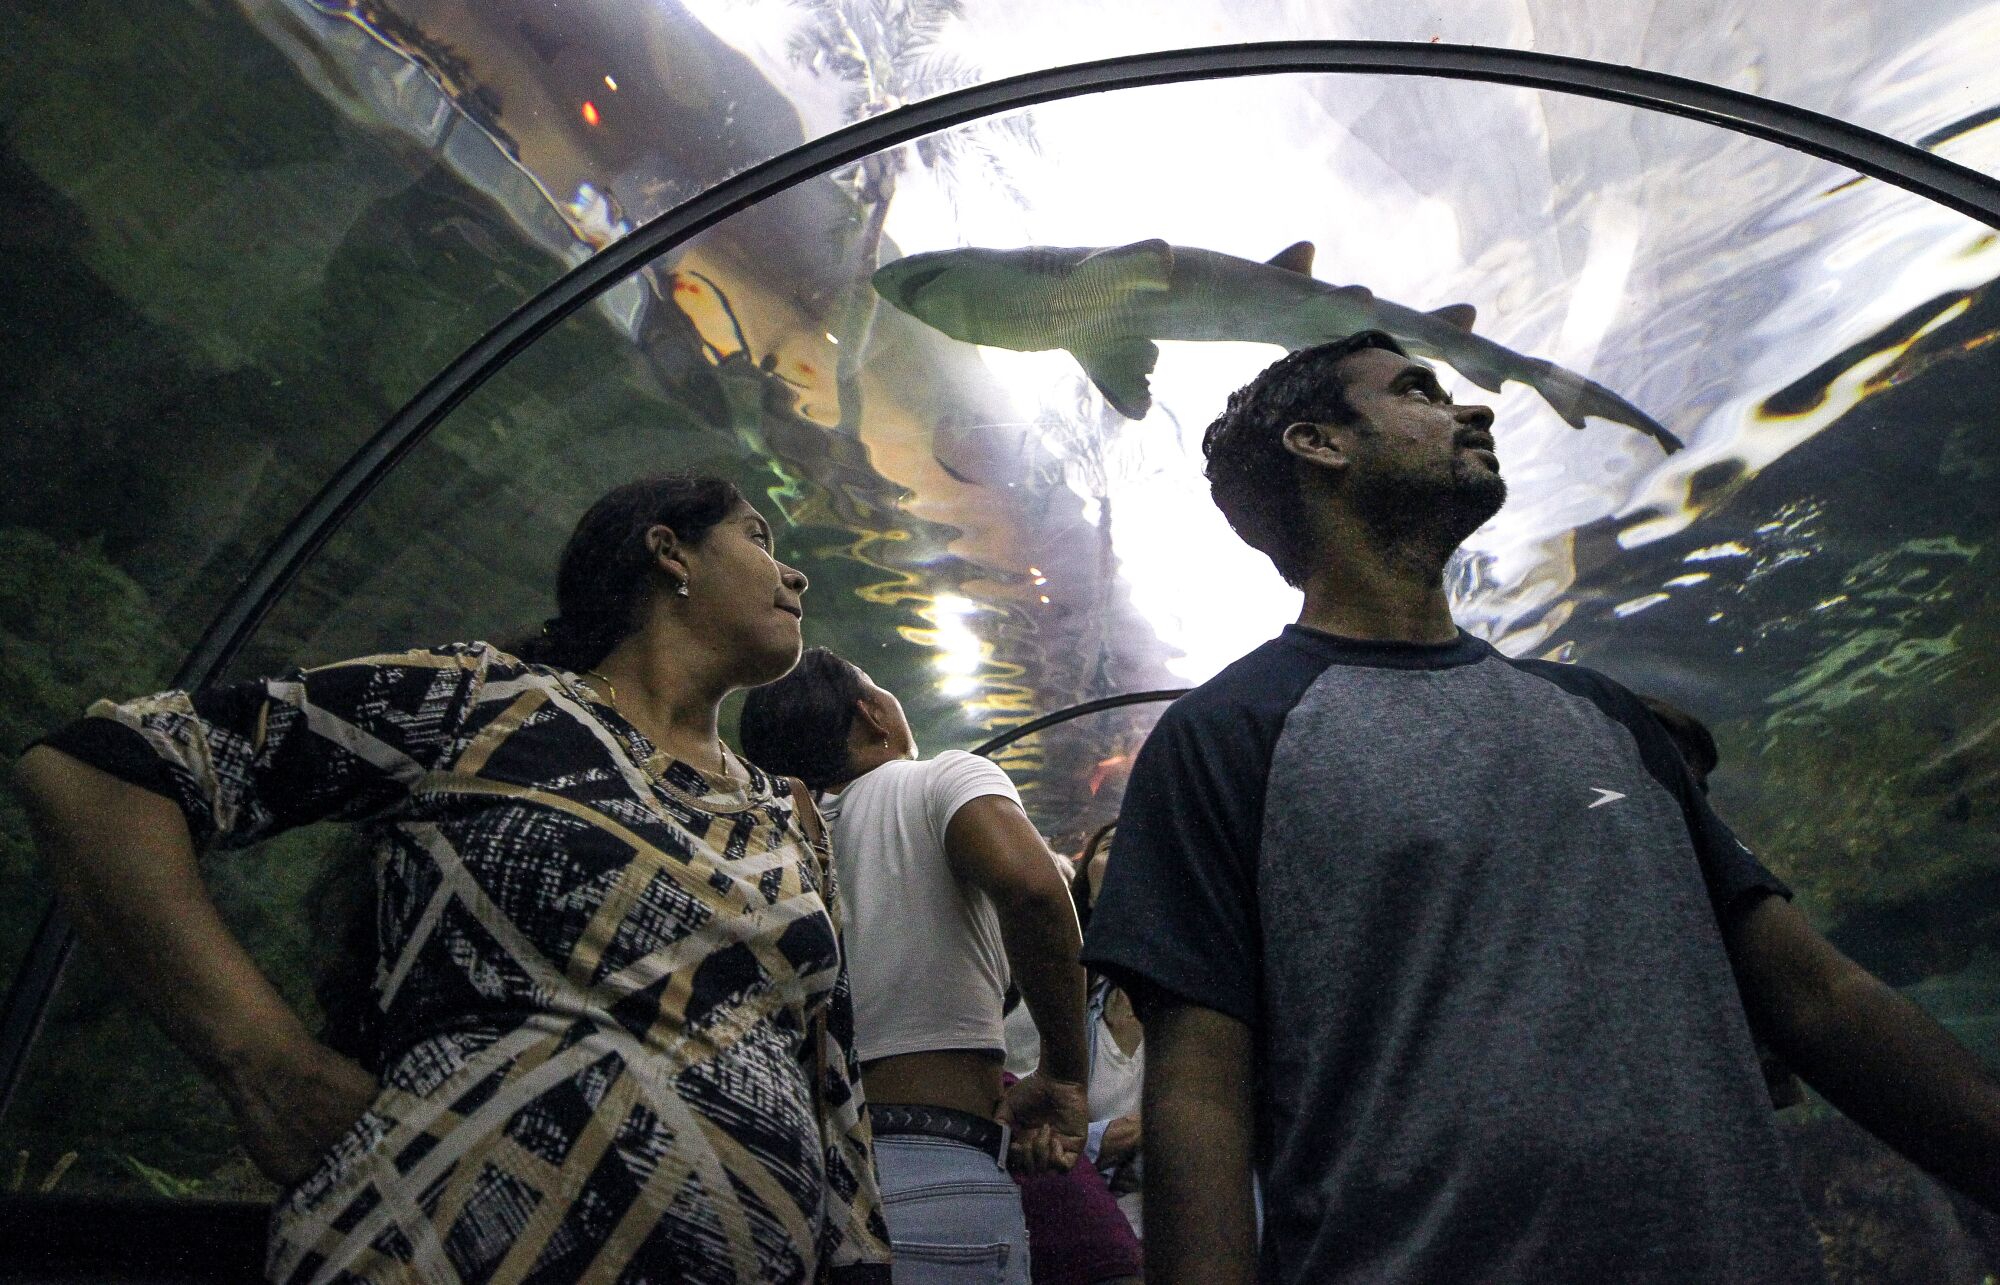 Gopinath Rao and his wife Sangeetha look at sharks while in the Shark Encounter at SeaWorld on a recent visit.